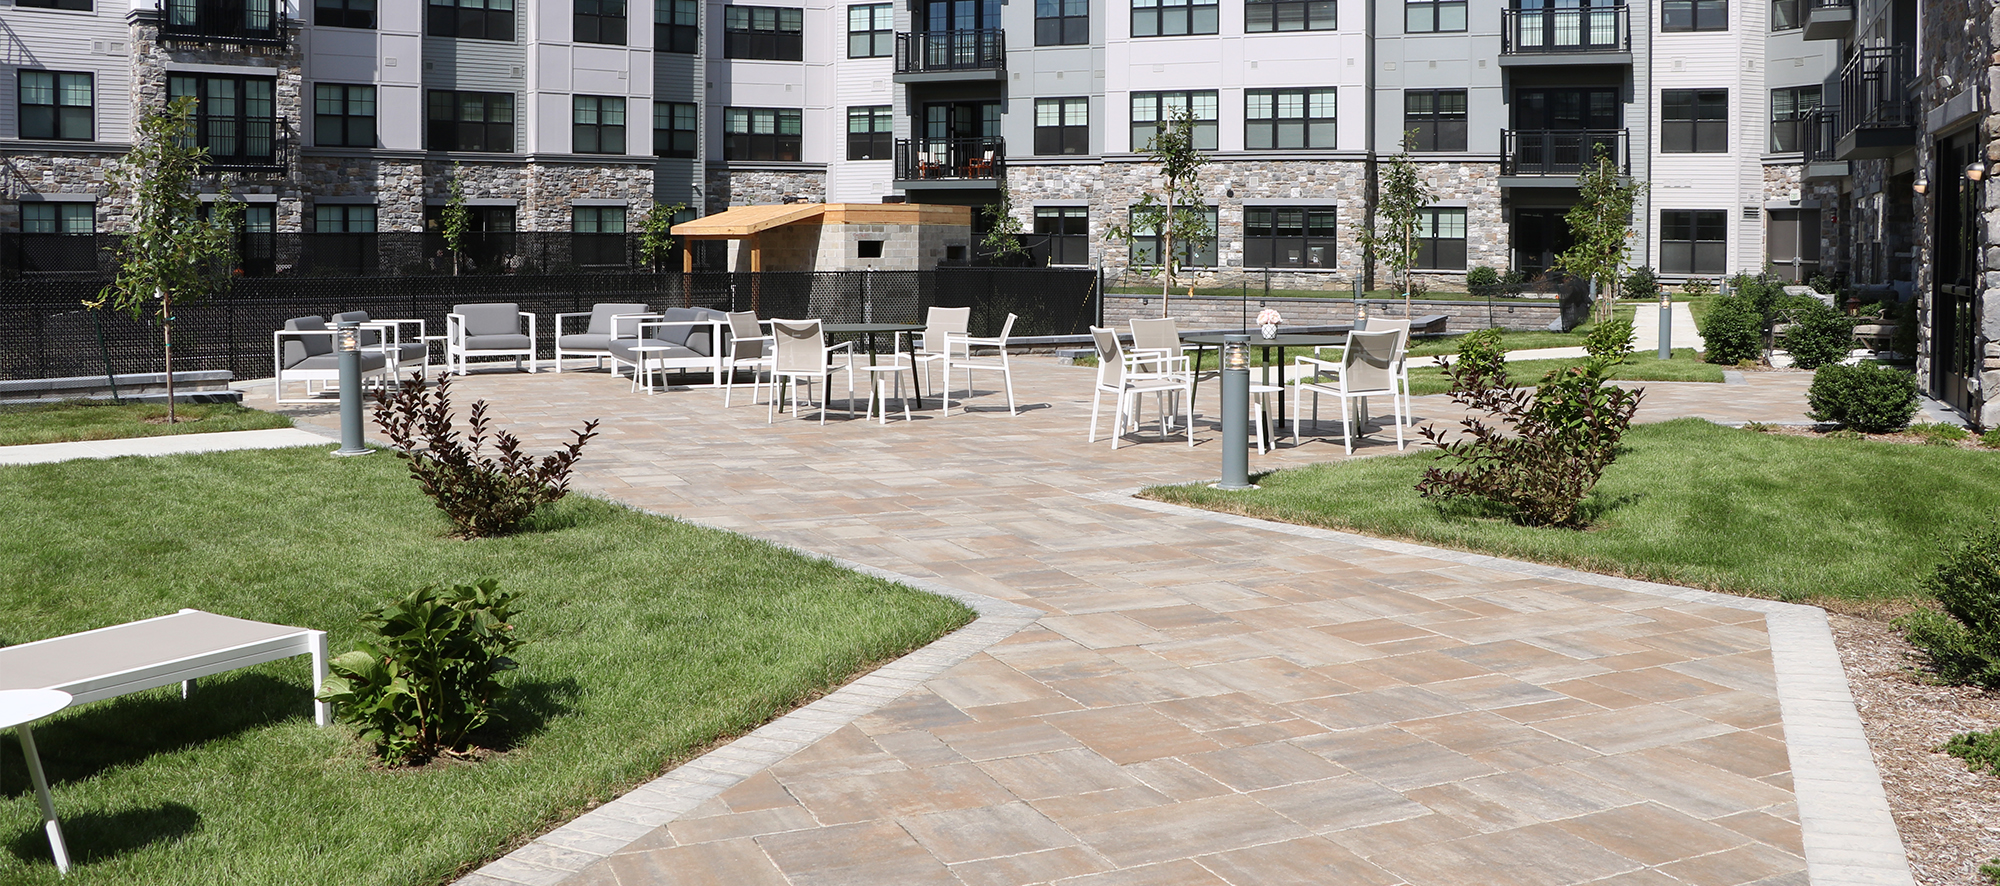 Outdoor gathering space in front of a grey building with ample seating, over brown Bristol Valley pavers lined with shrubs and grass.